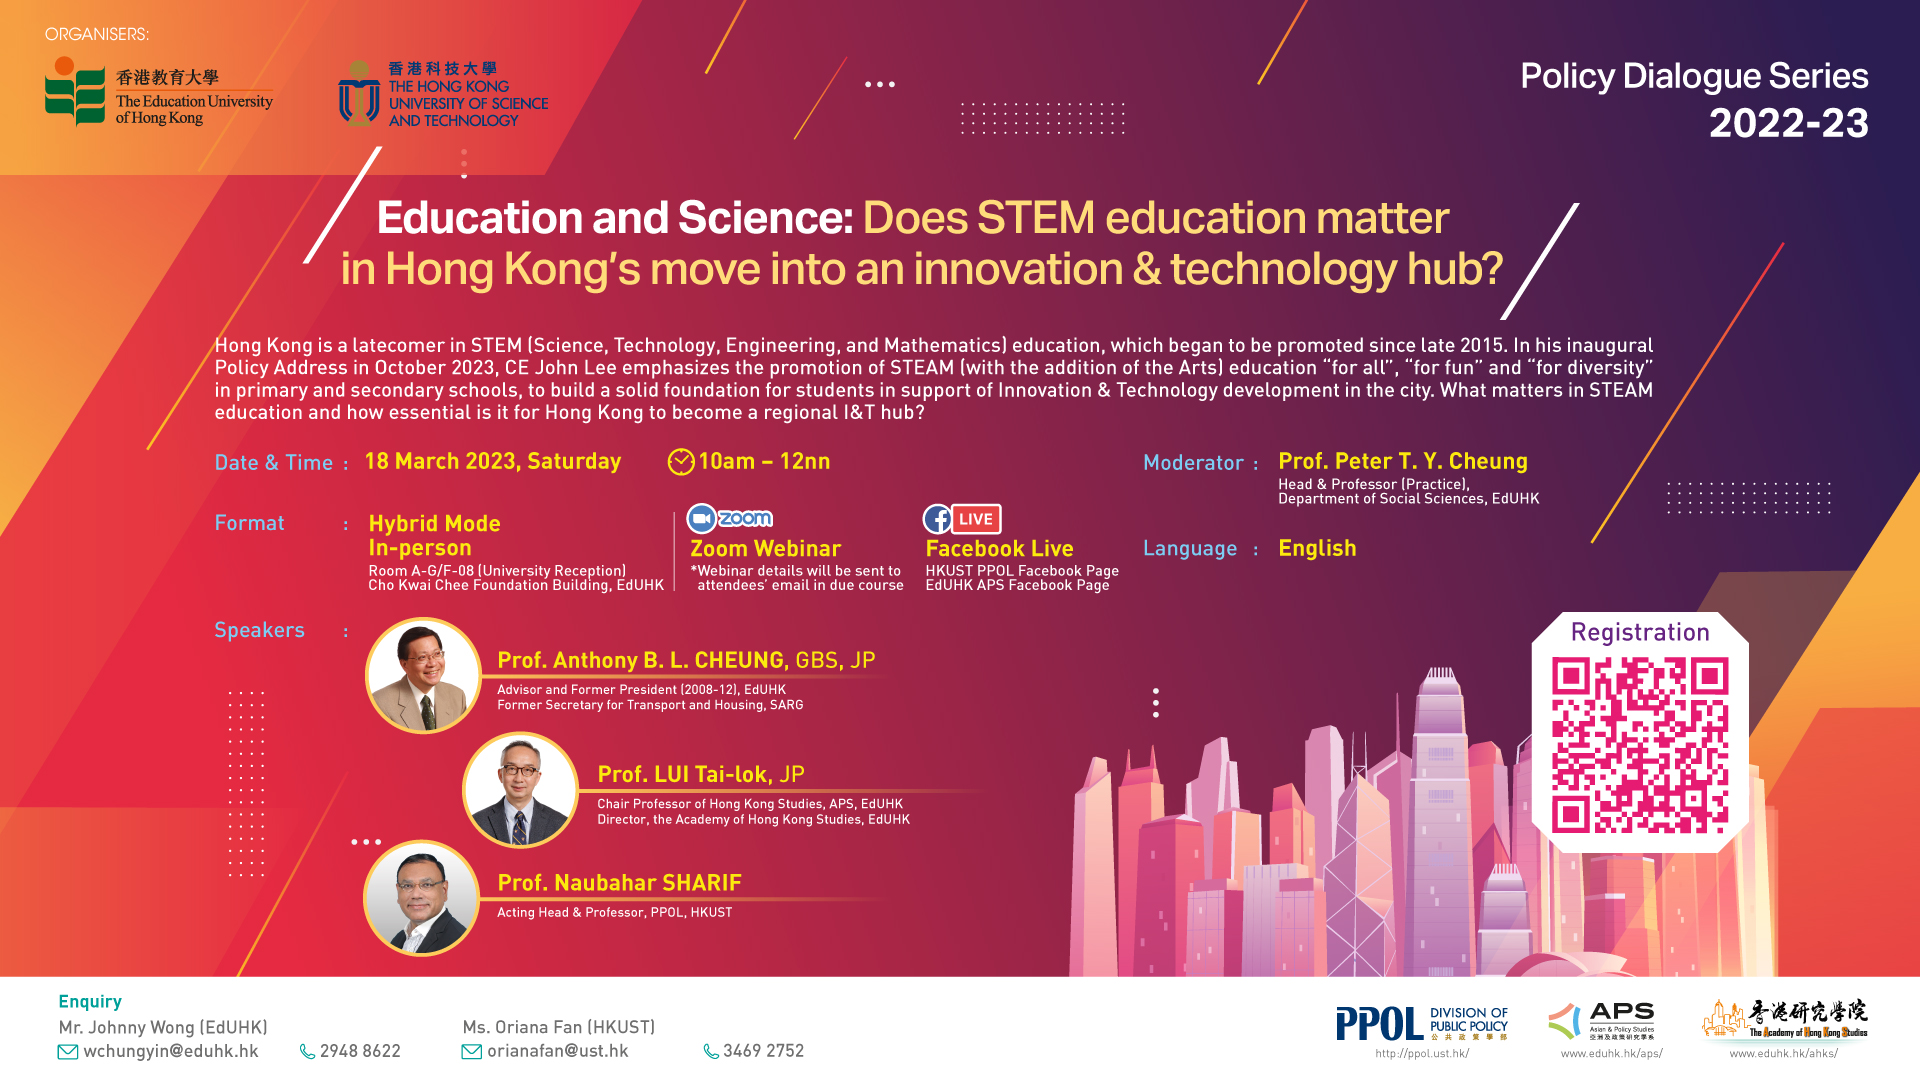 Education and Science: Does STEM education matter in Hong Kong's move into an innovation & technology hub?